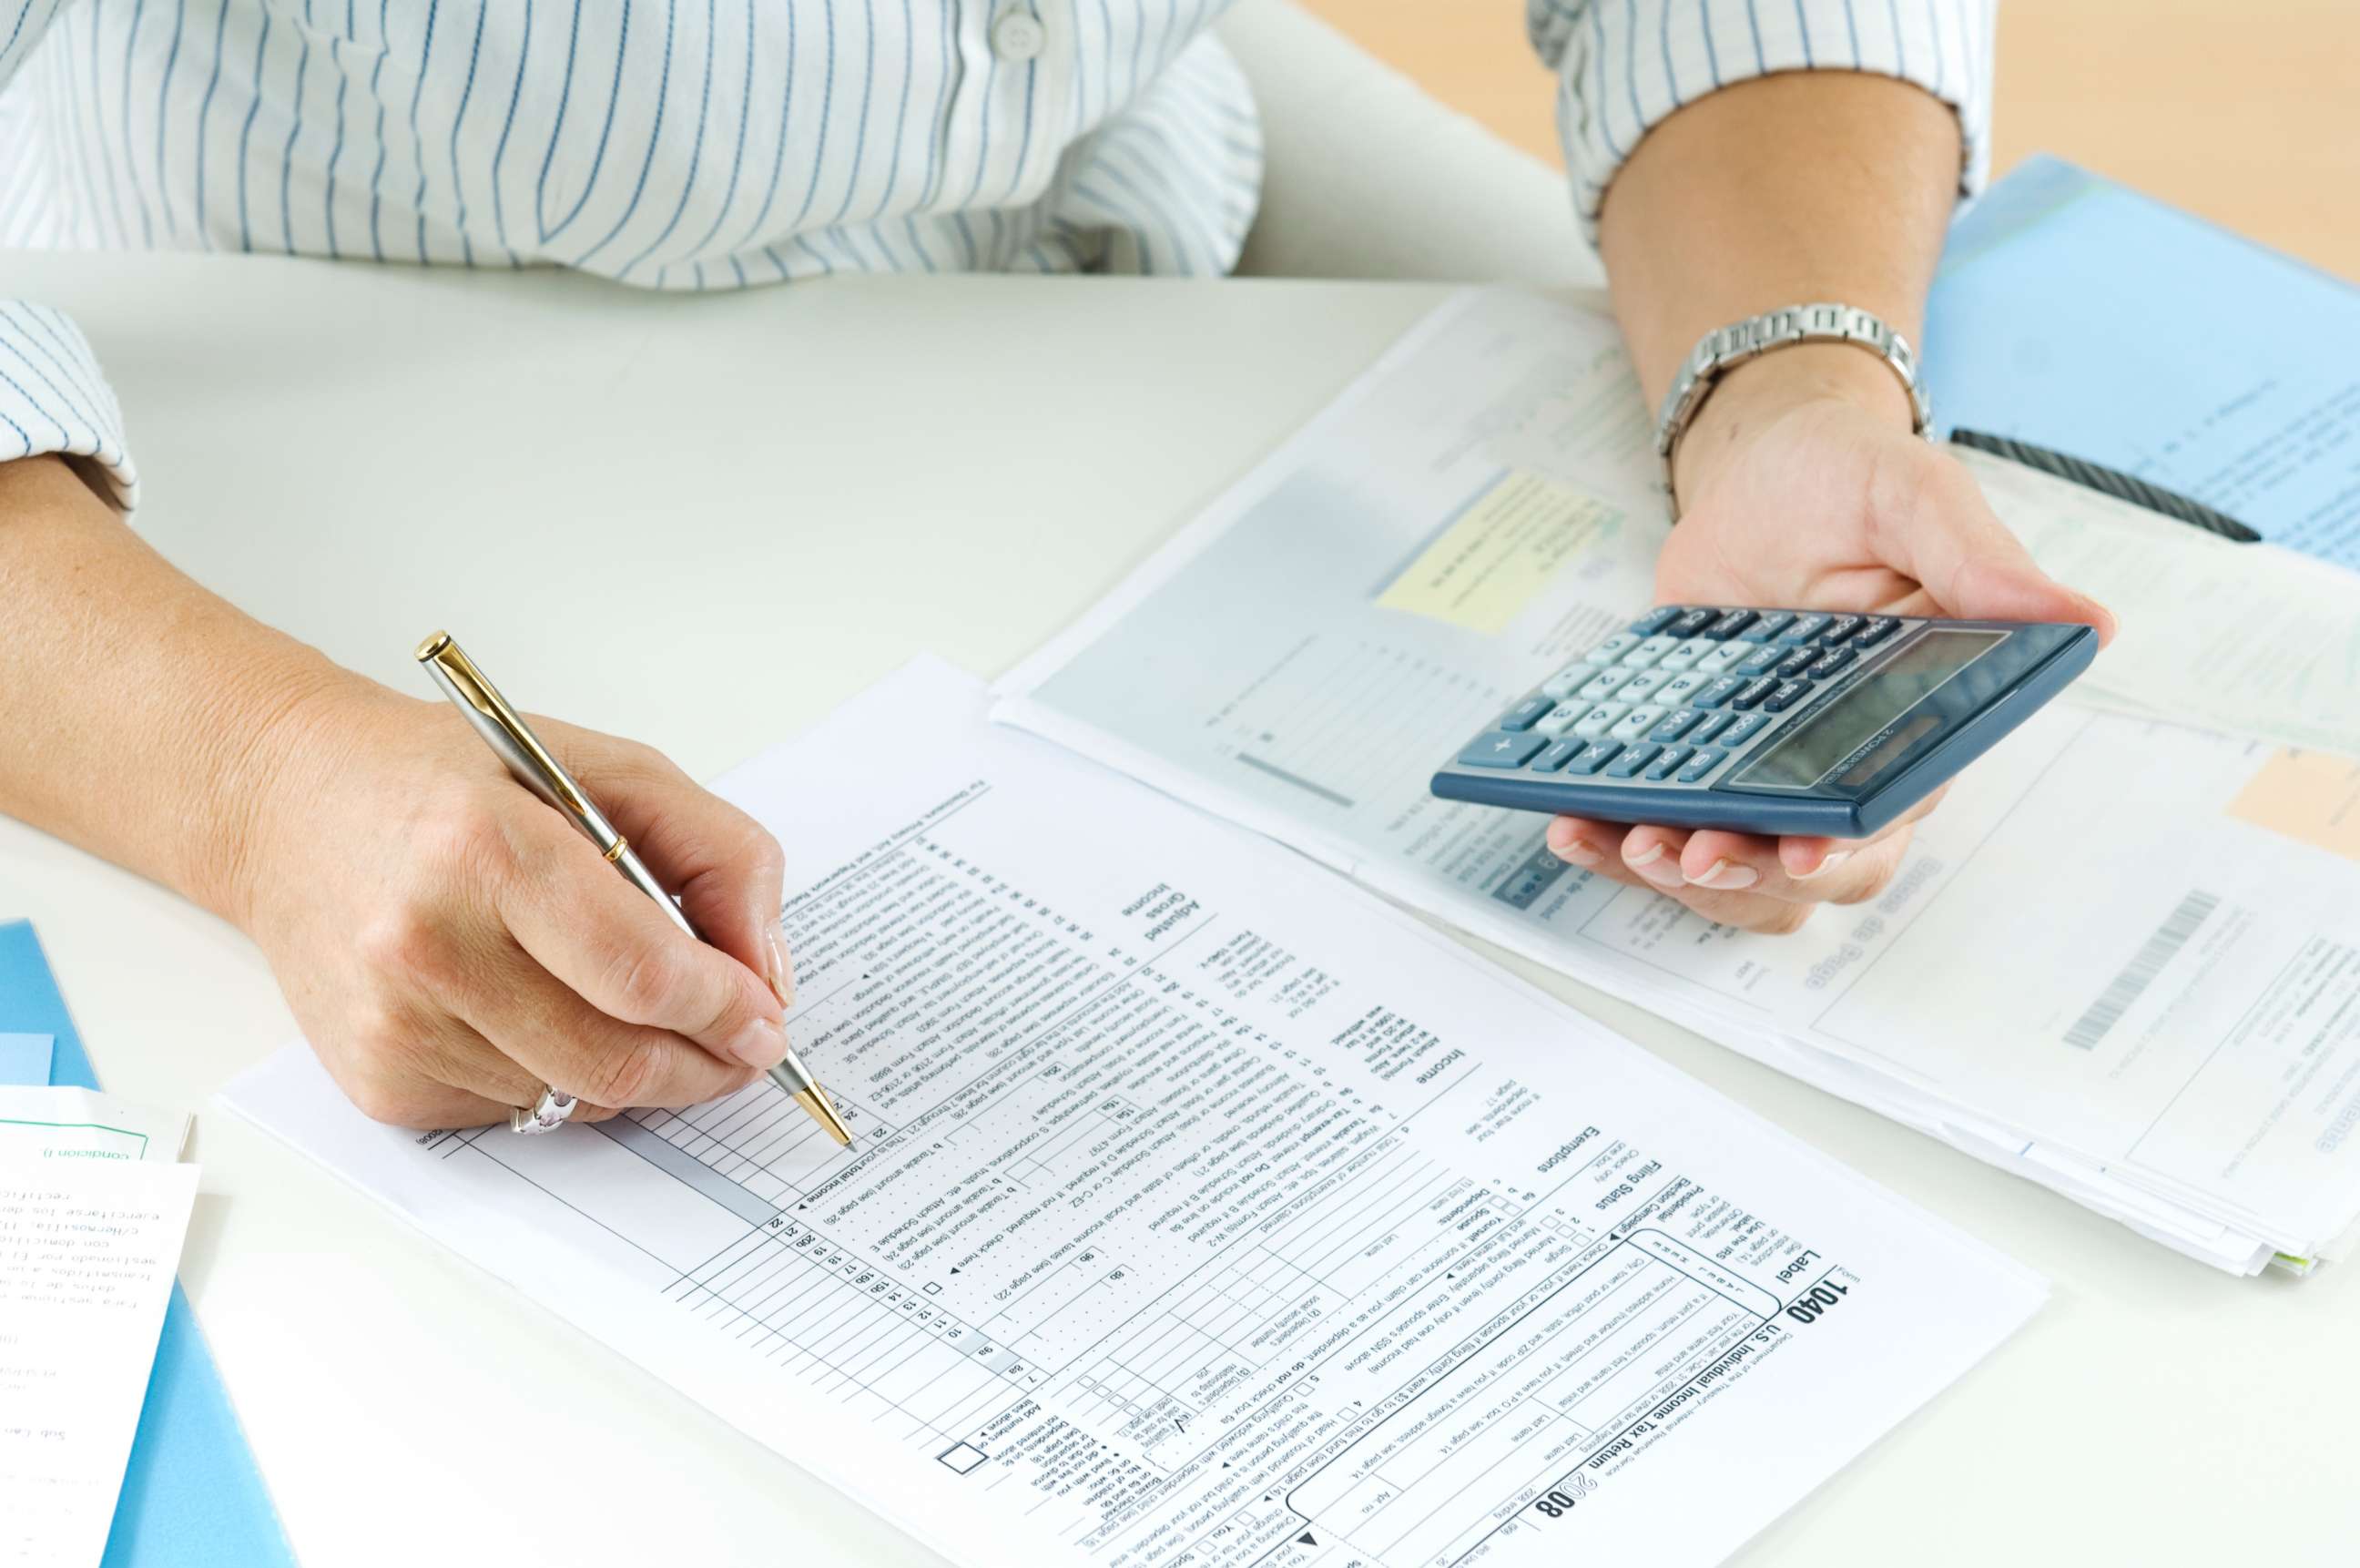 PHOTO: A woman calculates her taxes in this undated stock photo.